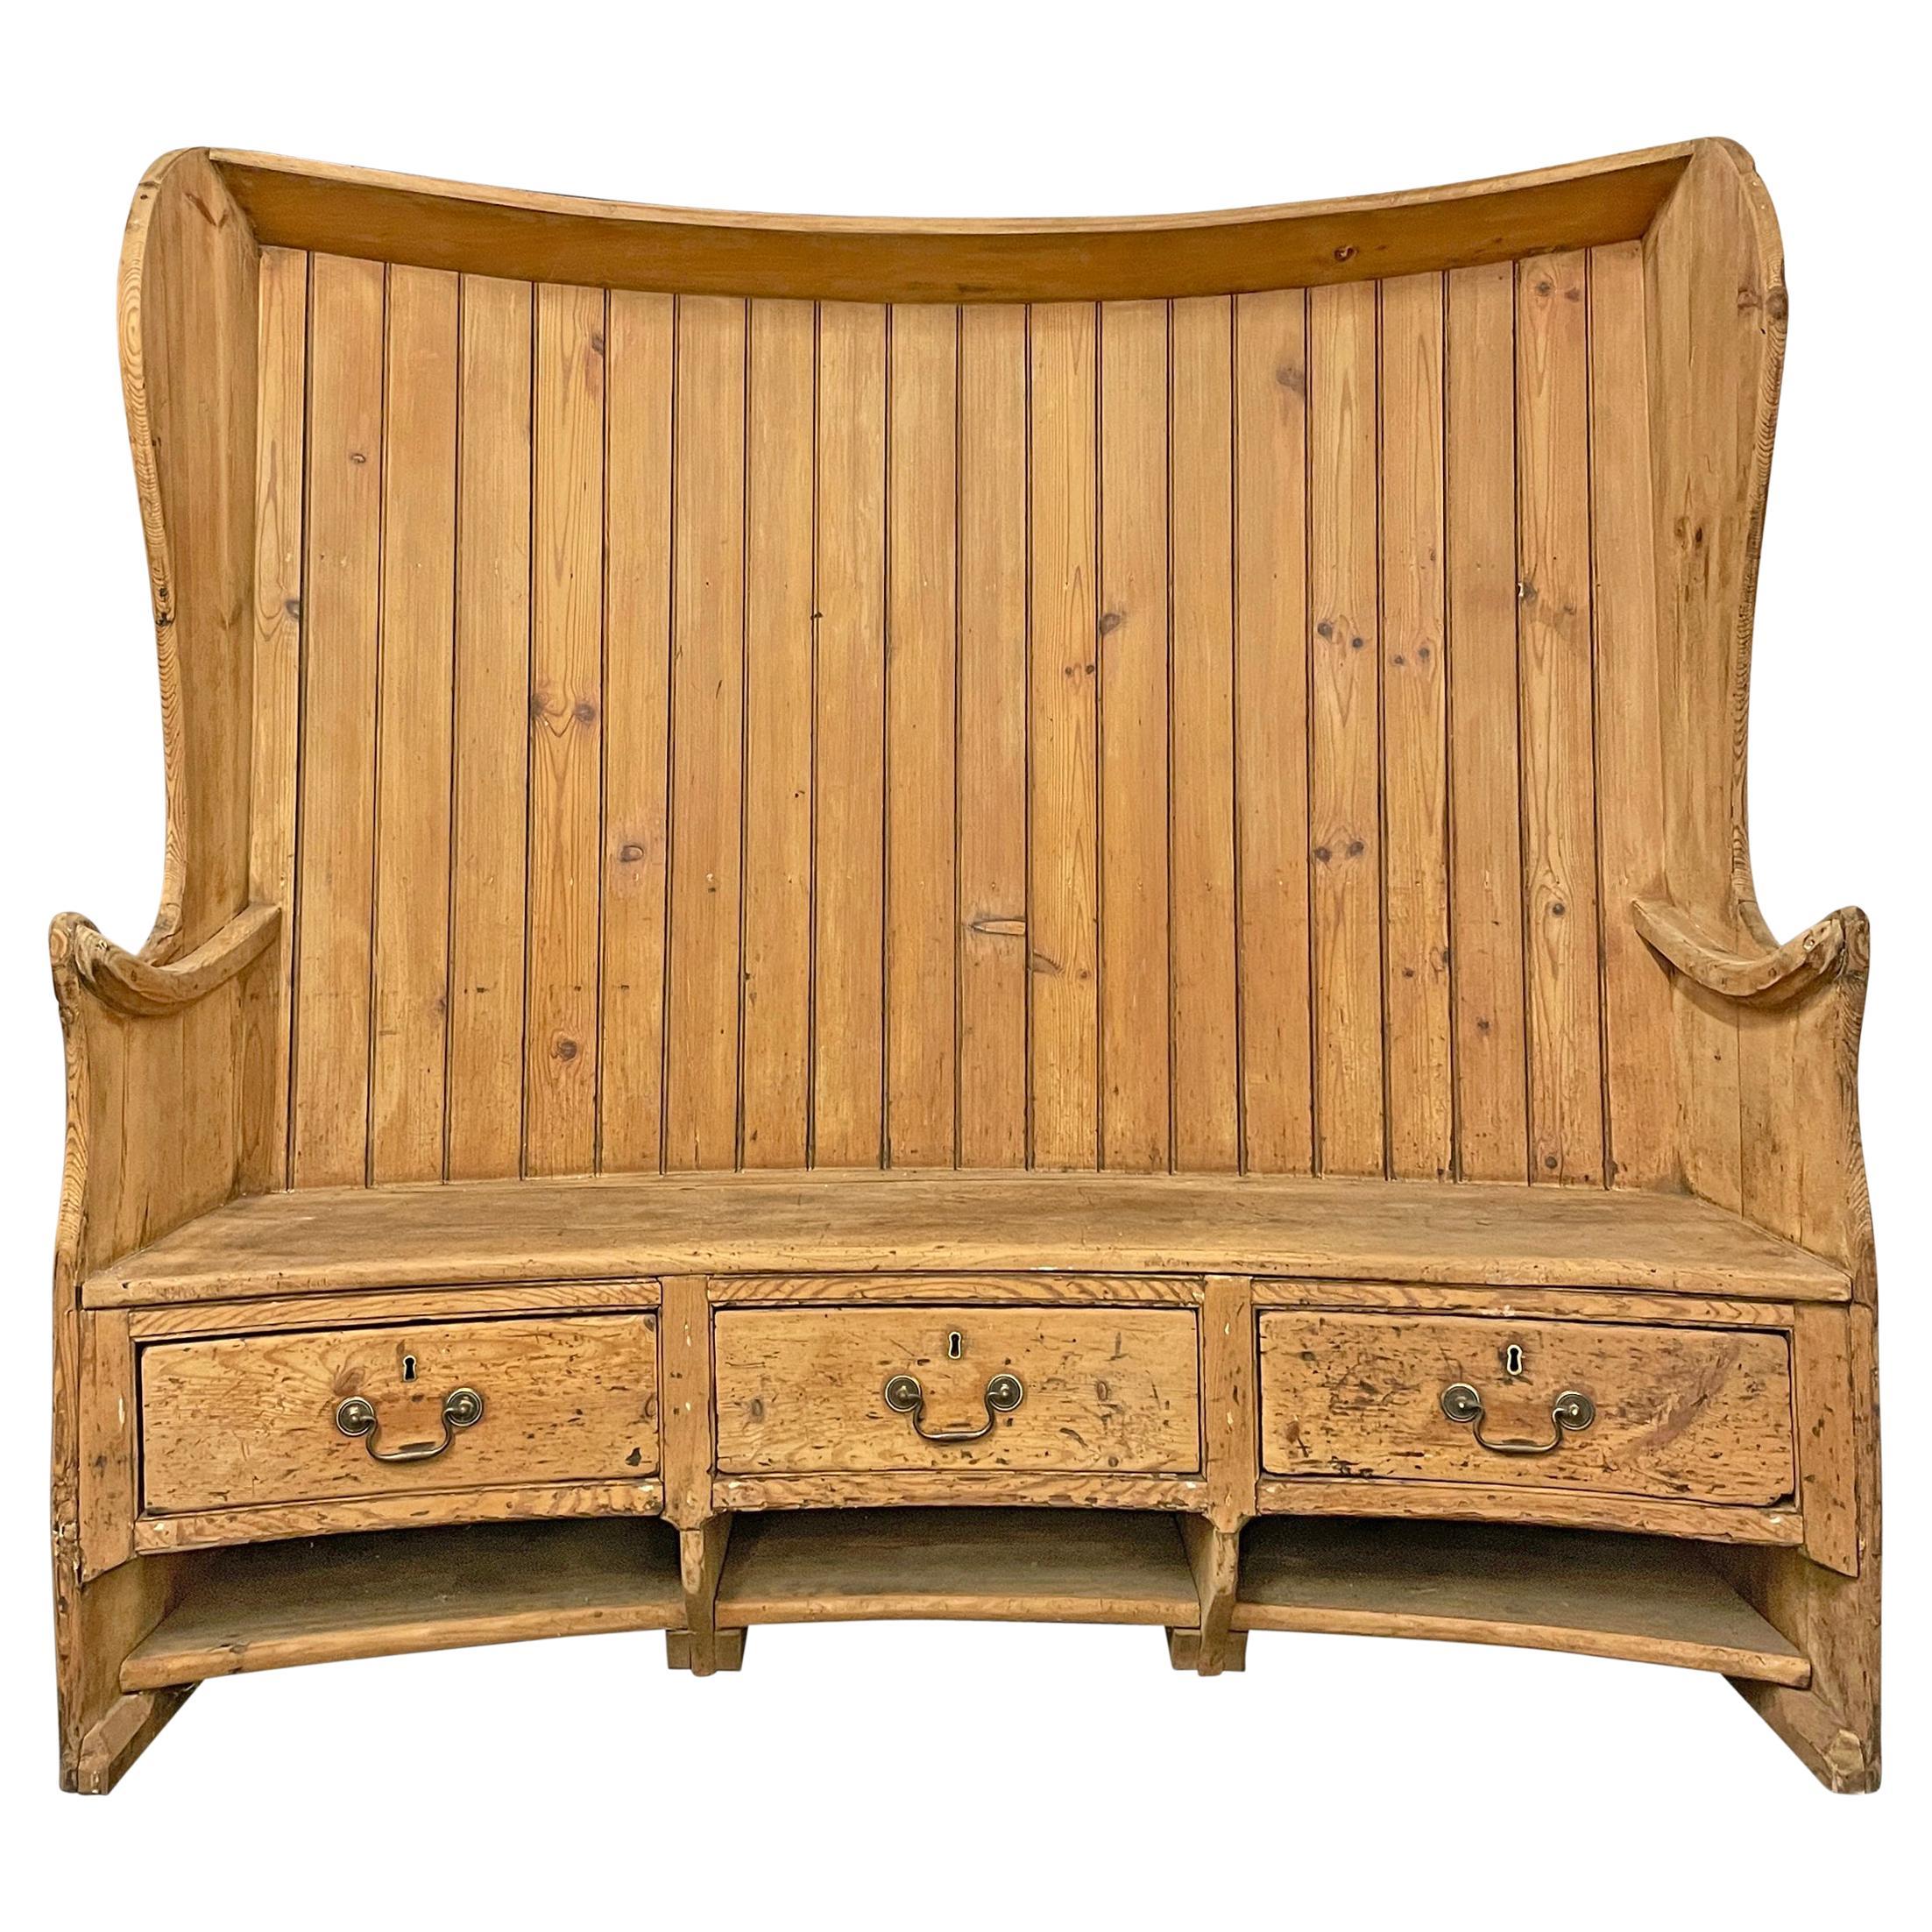 18th Century English Pine Curved Settle